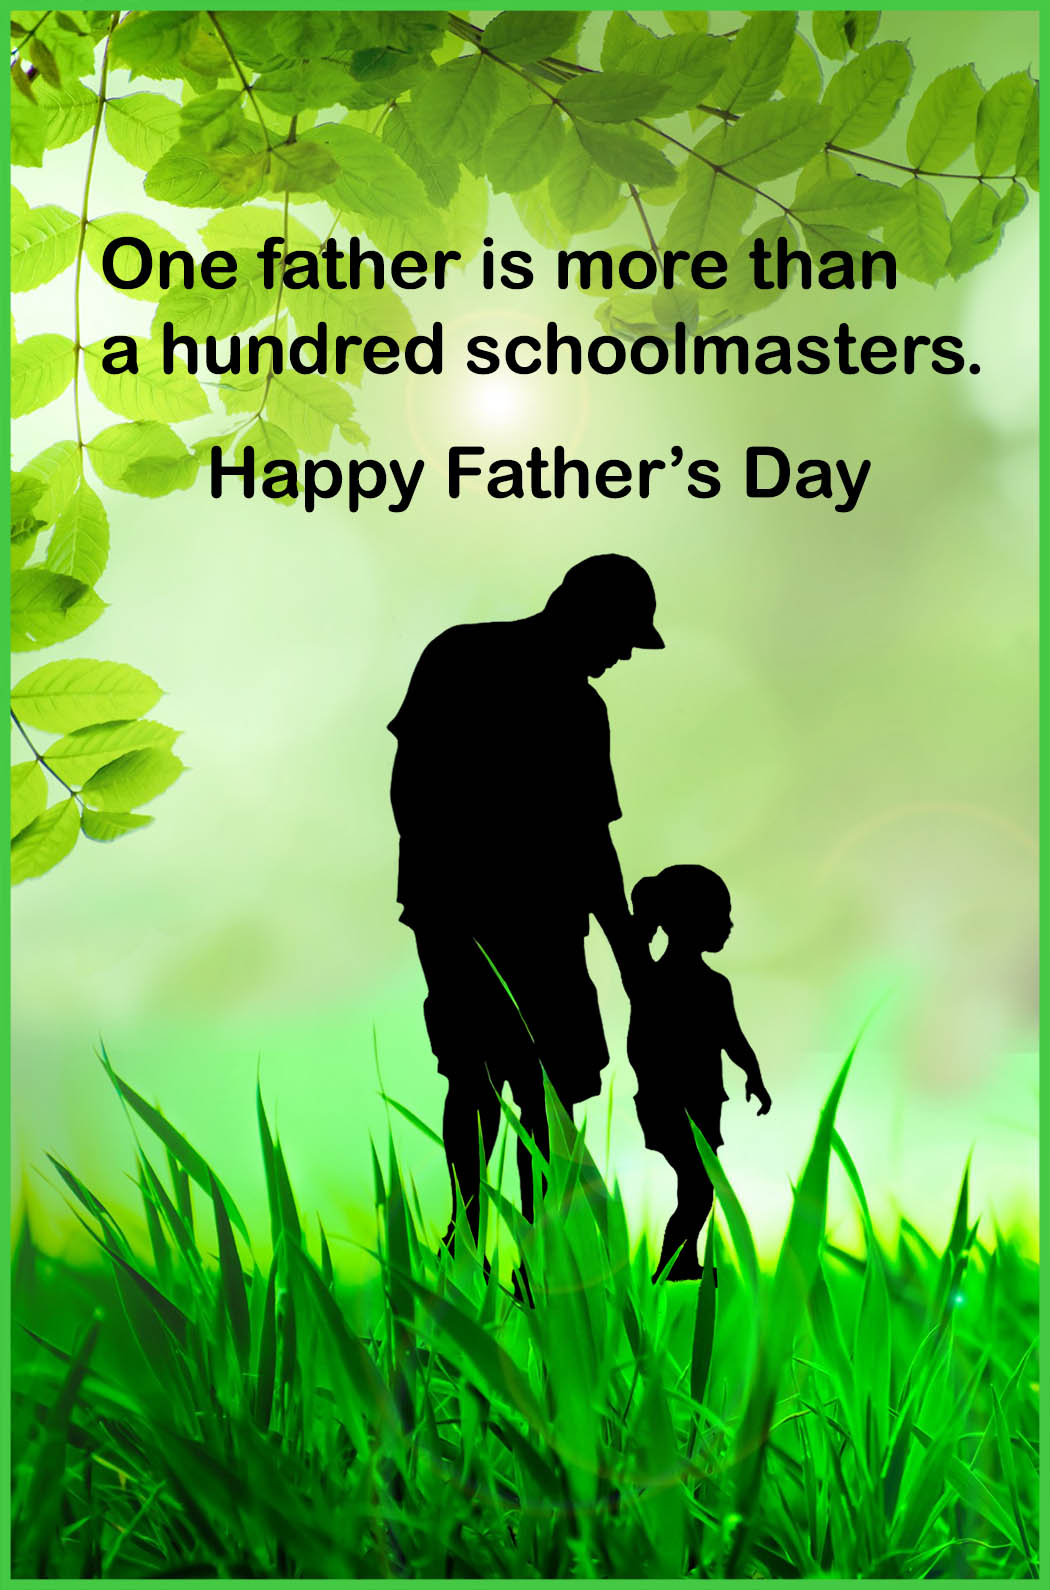 Have A Happy Father's Day